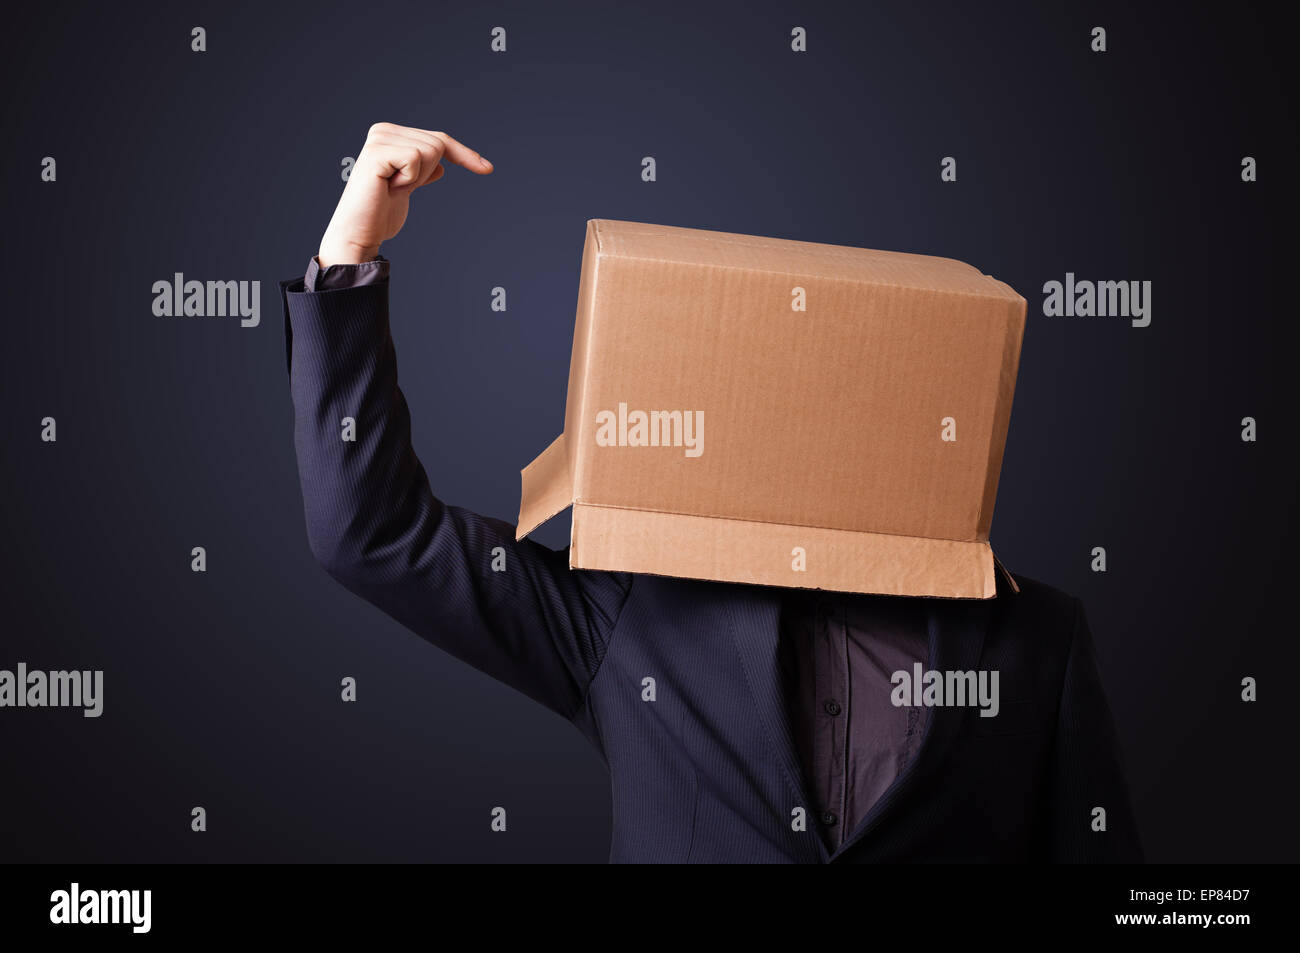 Young man gesturing with a cardboard box on his head Stock Photo